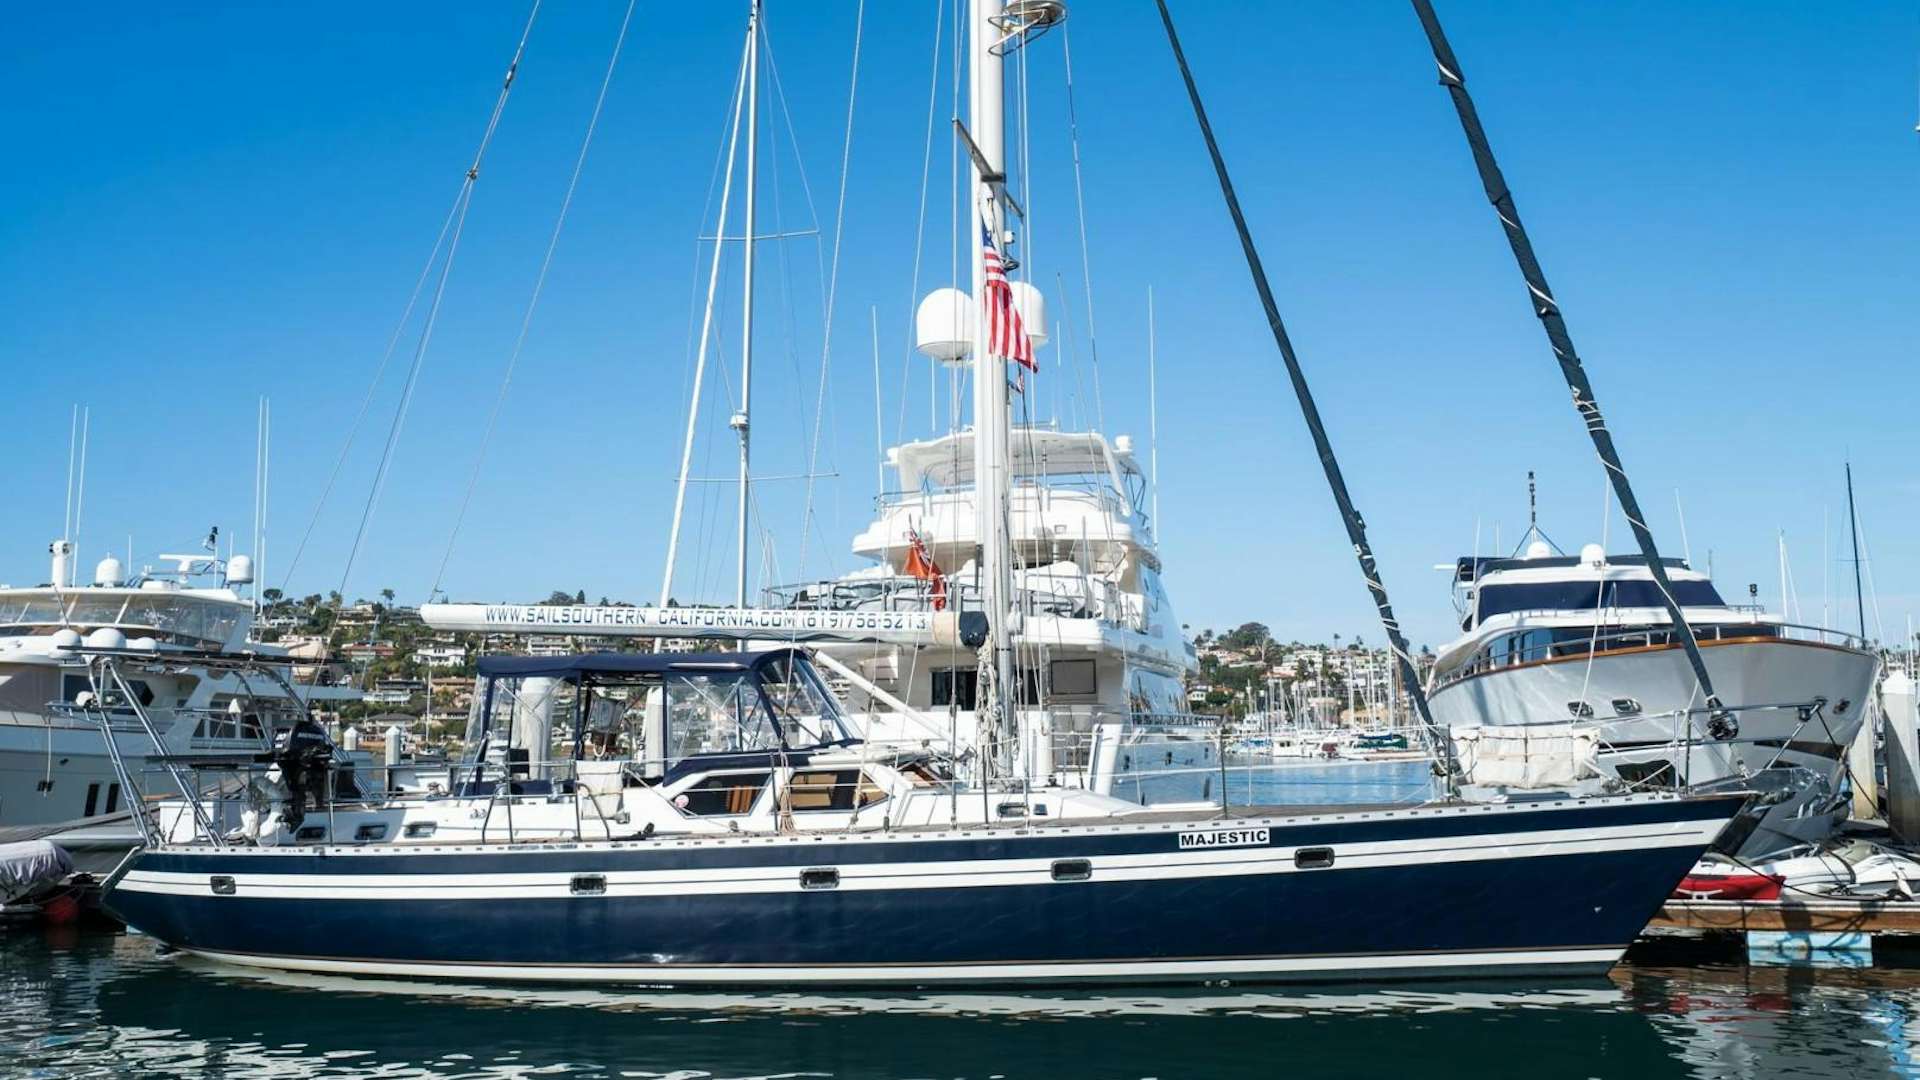 Watch Video for MAJESTIC Yacht for Sale